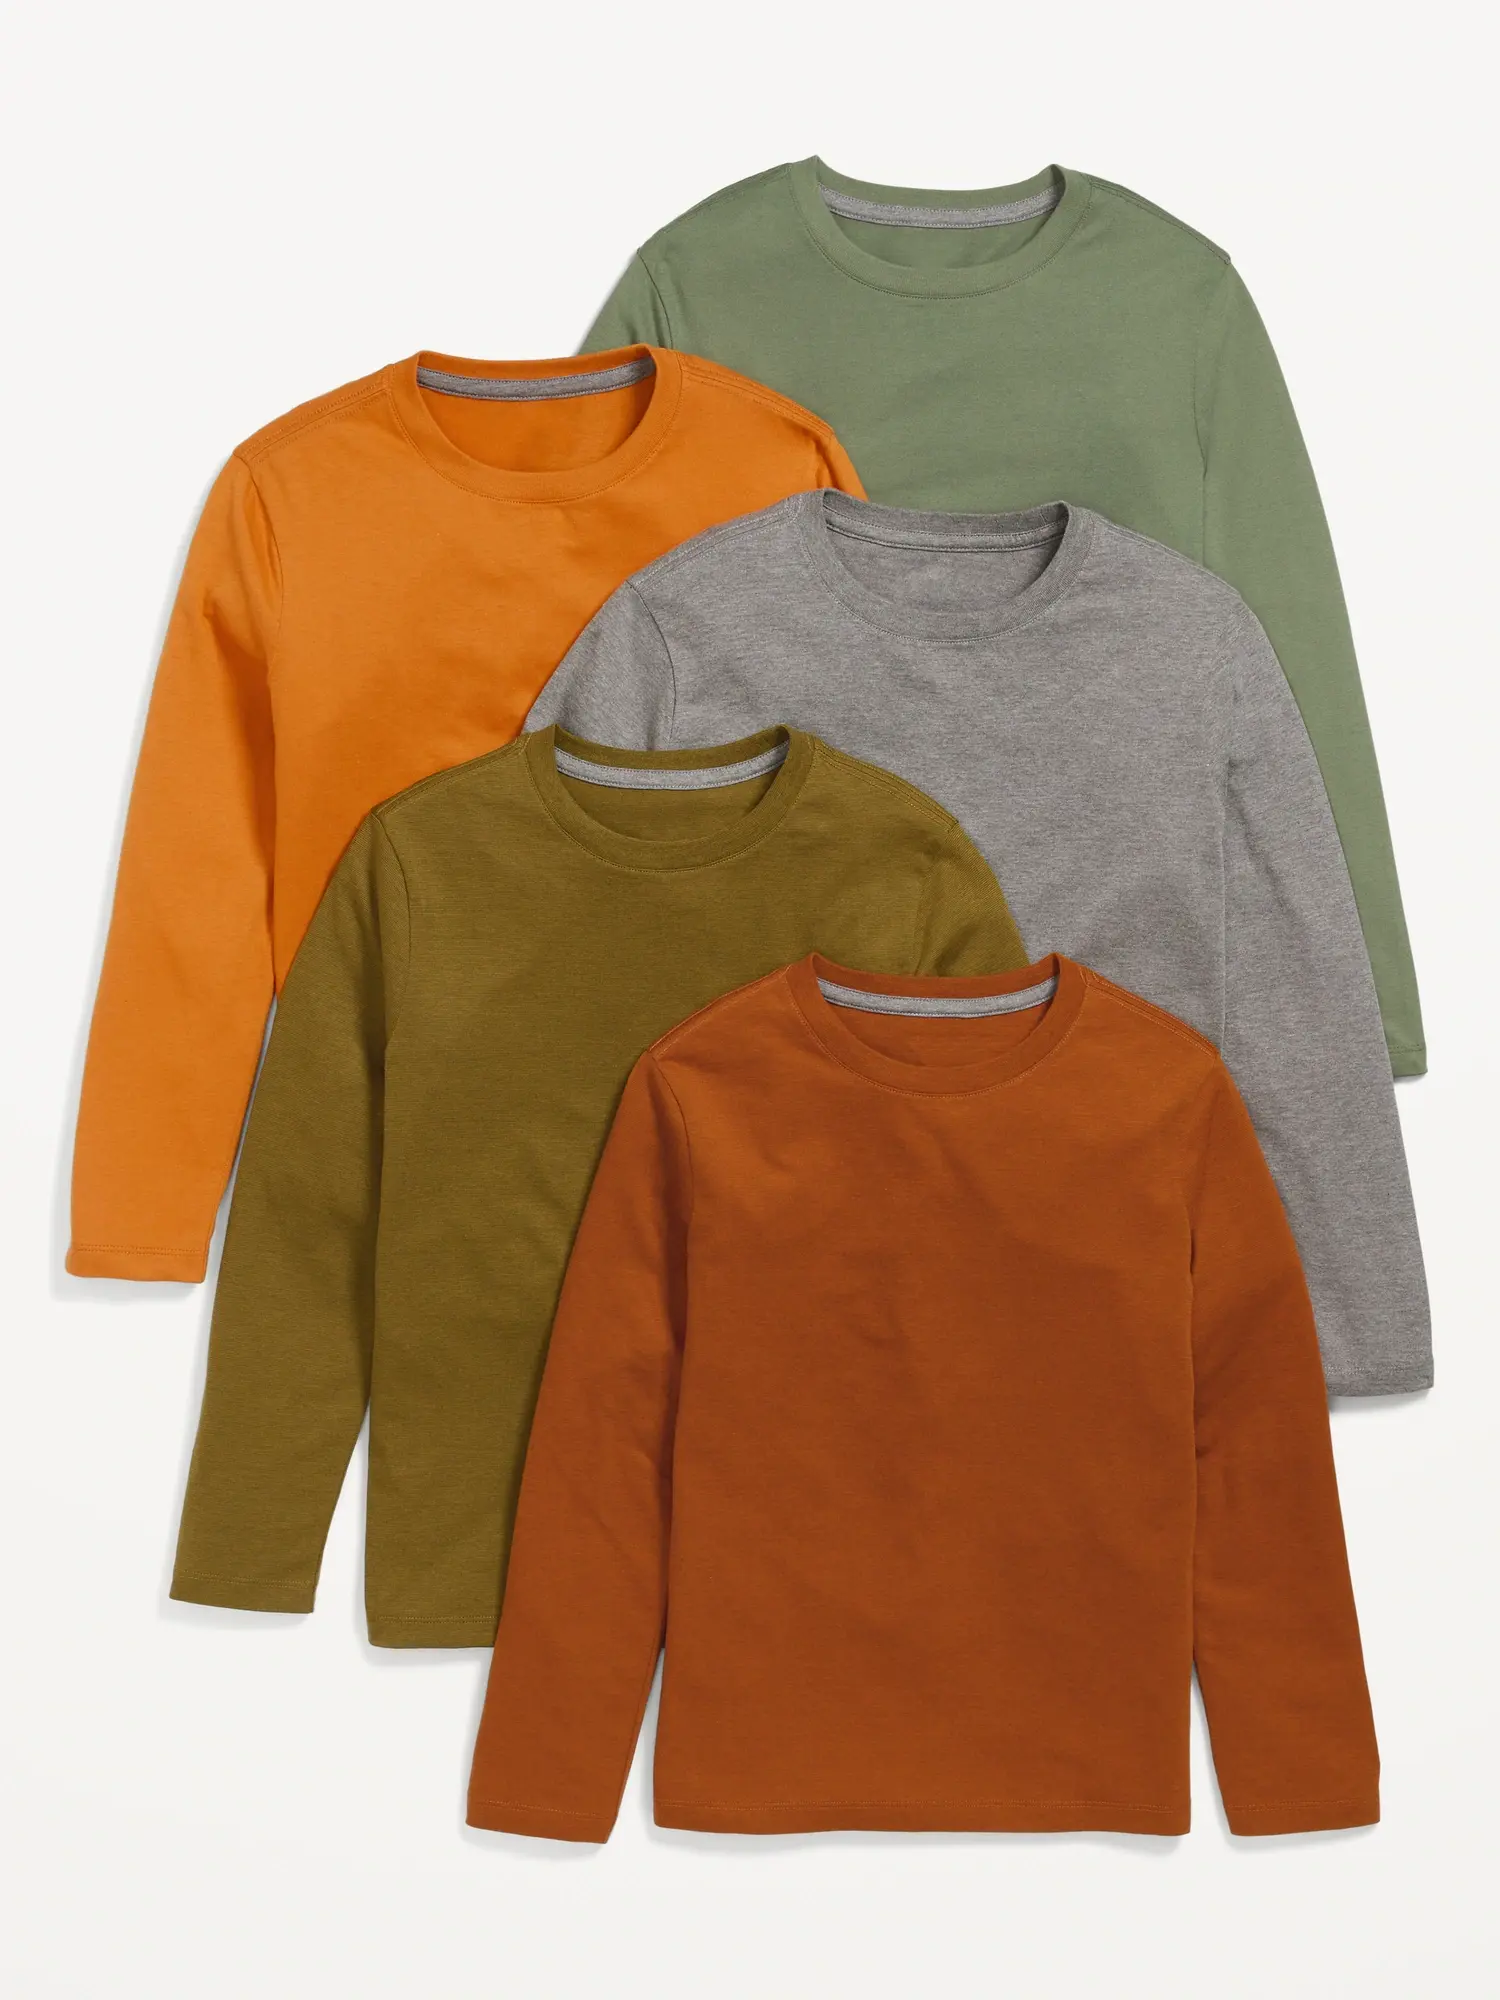 Old Navy Softest Long-Sleeve T-Shirt 5-Pack for Boys green. 1